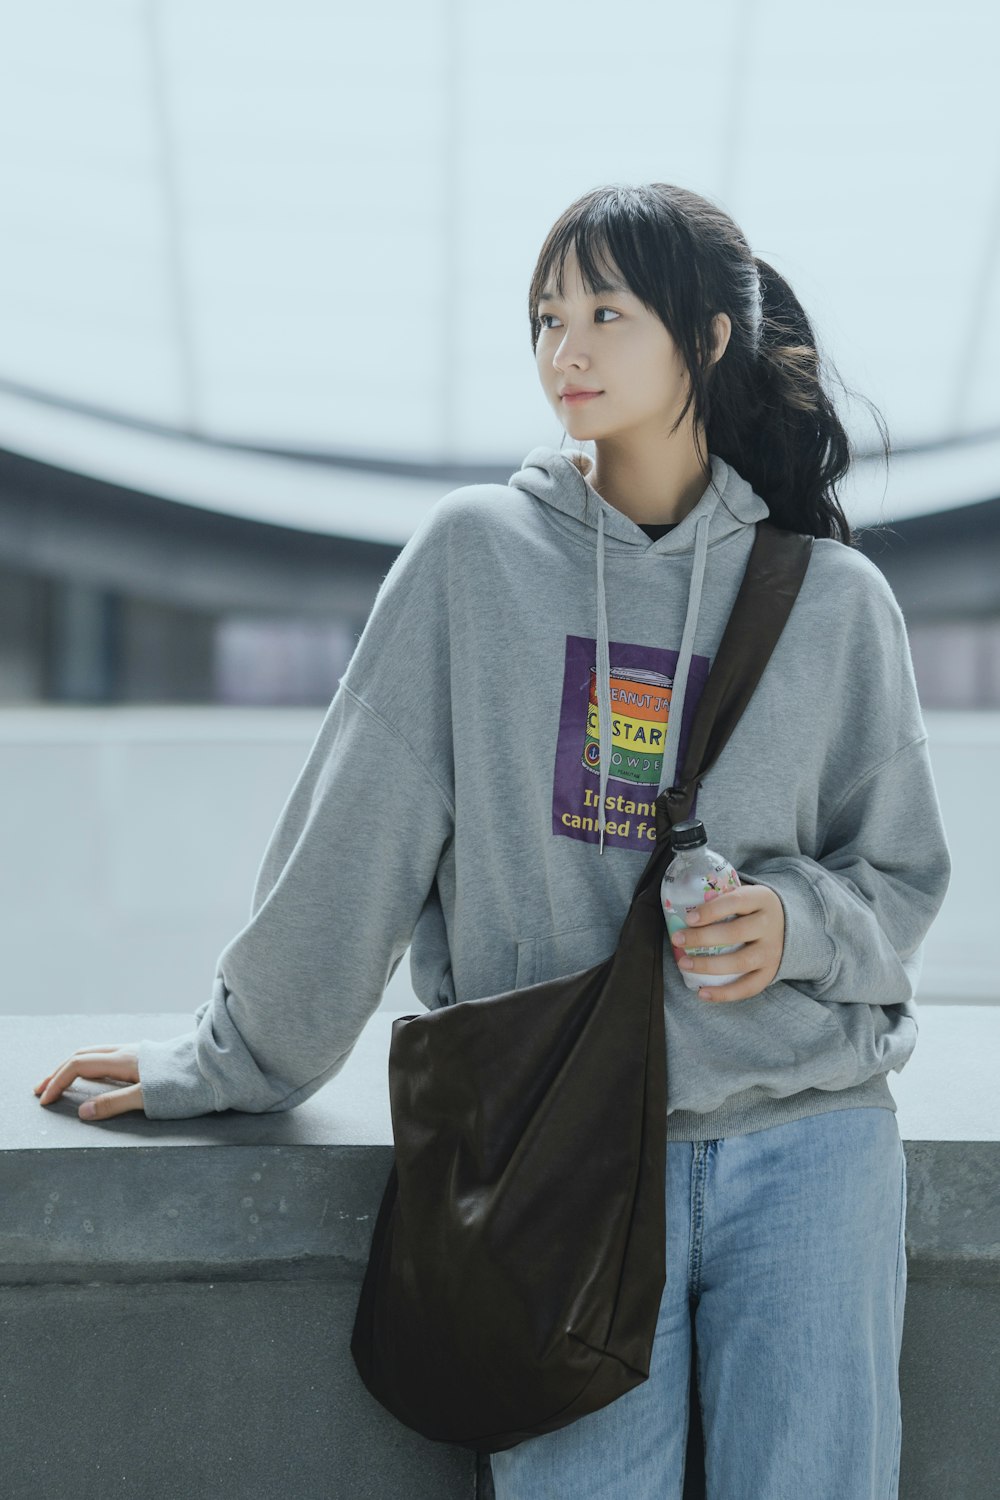 woman in gray hoodie holding black leather sling bag